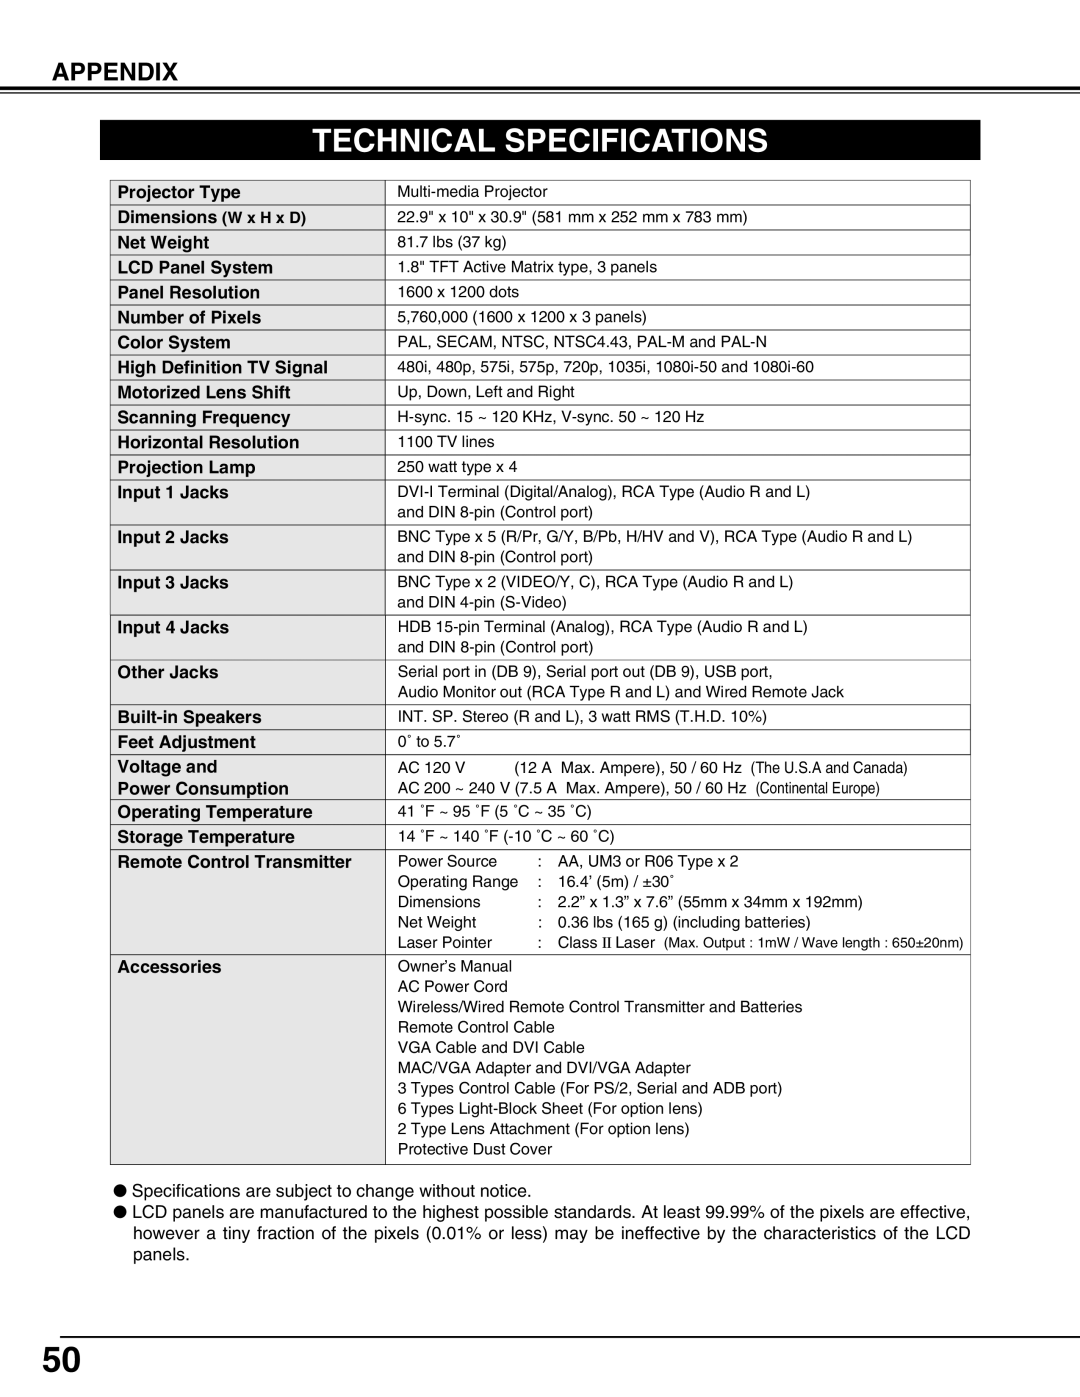 Eiki LC-UXT3 instruction manual Technical Specifications, Appendix 